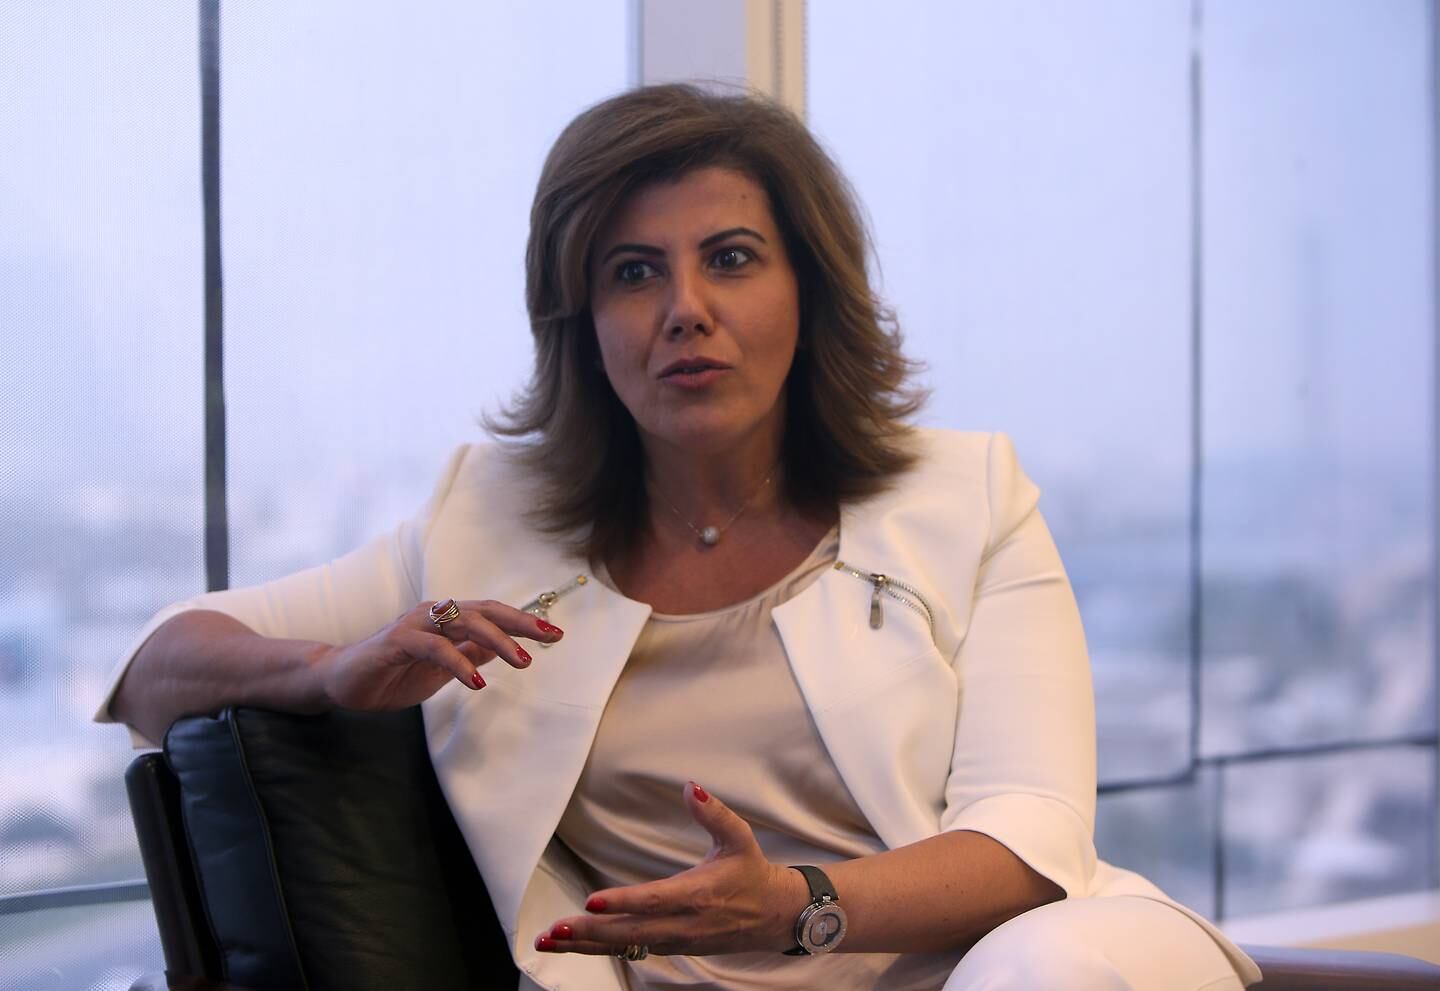 DUBAI - UNITED ARAB EMIRATES - 14JULY2016 - Elissar Farah Antonios, Chief Executive Officer, Citi Bank UAE during an interview at Citi Bank headquarters yesterday in Dubai. Ravindranath K / The National (to of with Frank story for Buisness)  ID: 78578 *** Local Caption ***  RK1407-FRANKcitibank14.jpg